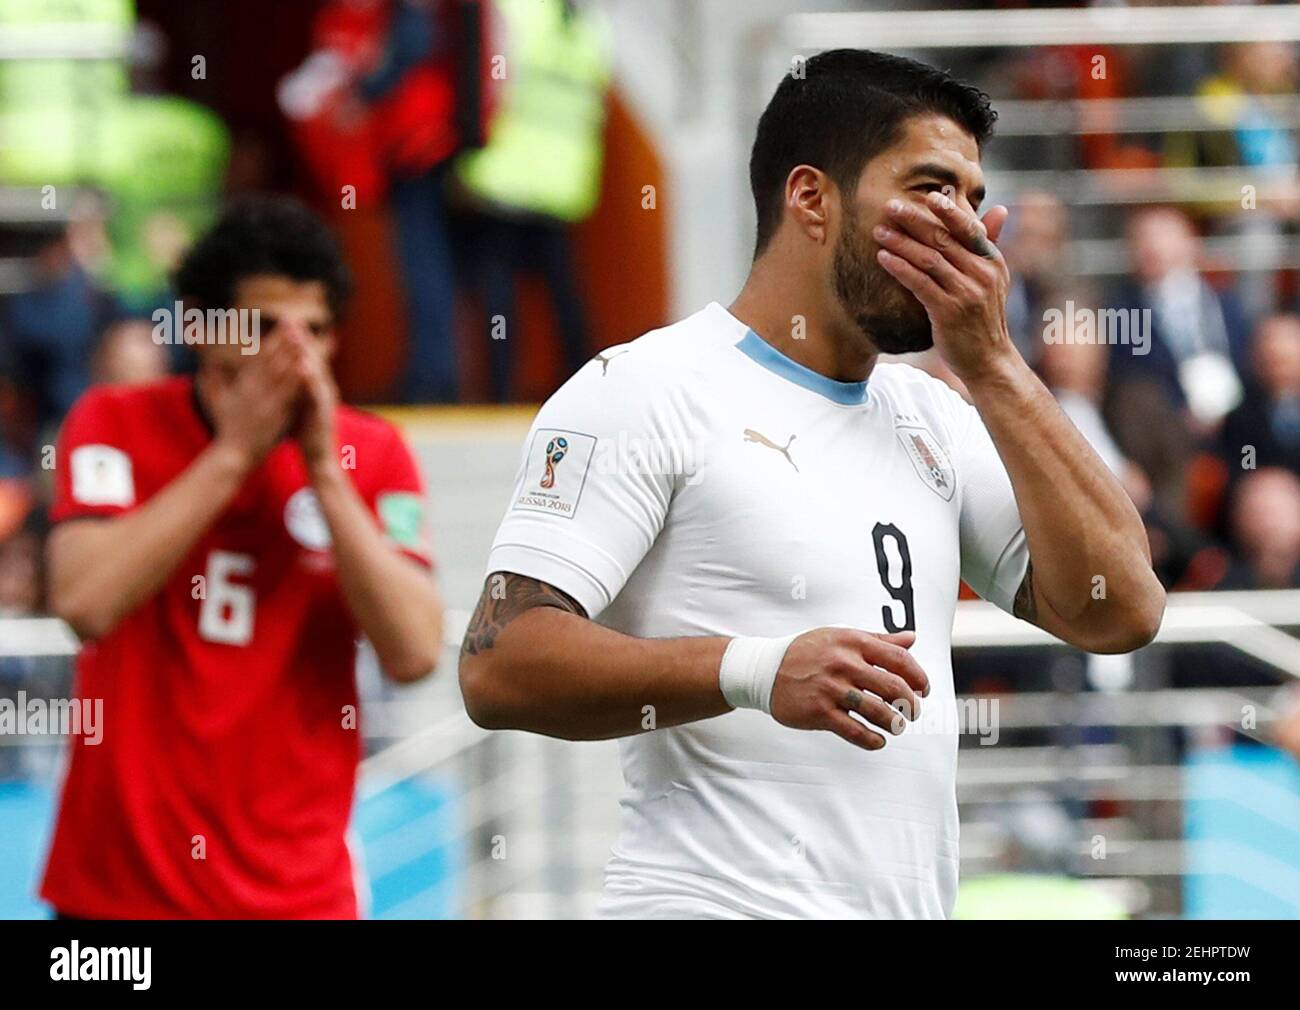 Soccer Football - World Cup - Group A - Egypt vs Uruguay - Ekaterinburg Arena, Yekaterinburg, Russia - June 15, 2018   Uruguay's Luis Suarez reacts after missing a chance to score   REUTERS/Damir Sagolj Stock Photo